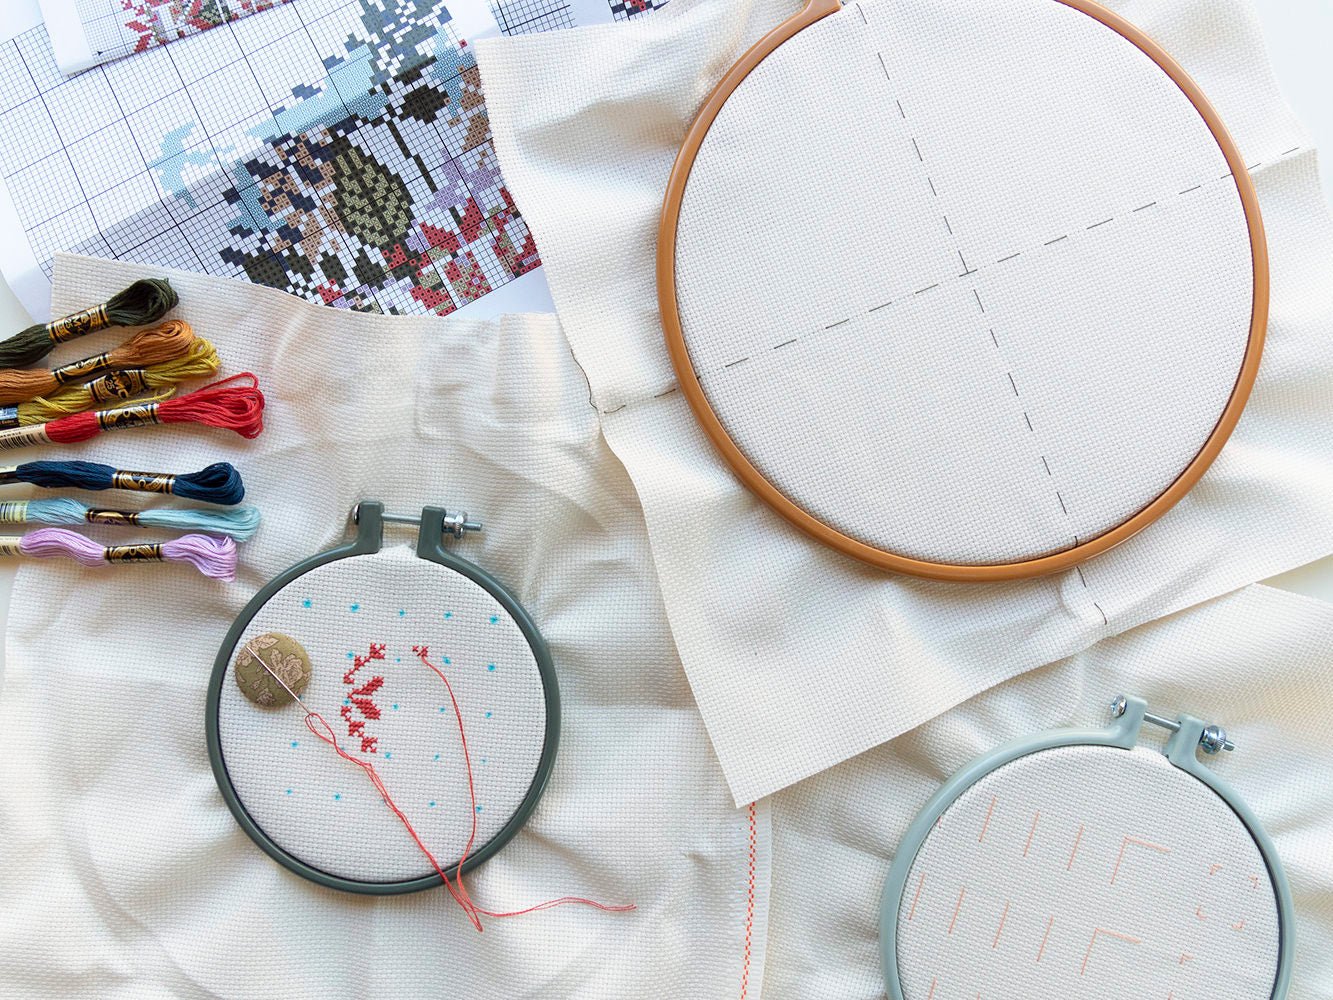 Cross Stitch Kits: Stamped Cross Stitch Kits for Beginners. [1 Embroidery  Hoop] Simple and Easy Beginner Cross Stitch Kits for Adults and Kids, use  as